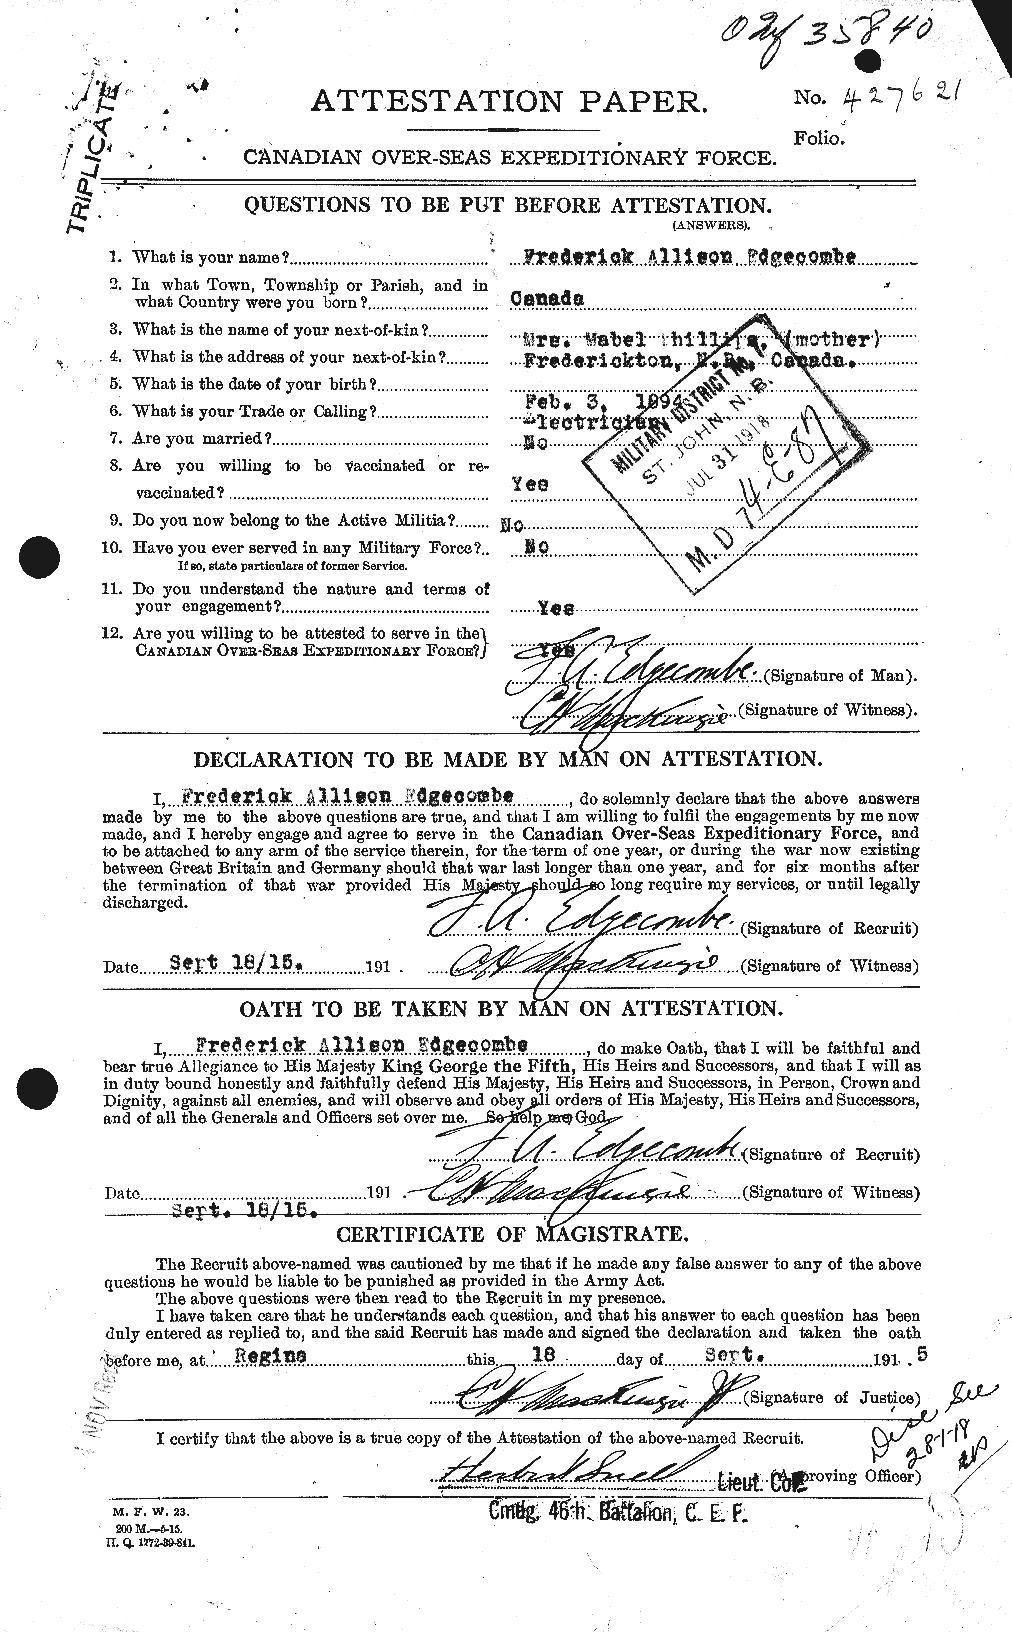 Personnel Records of the First World War - CEF 308252a